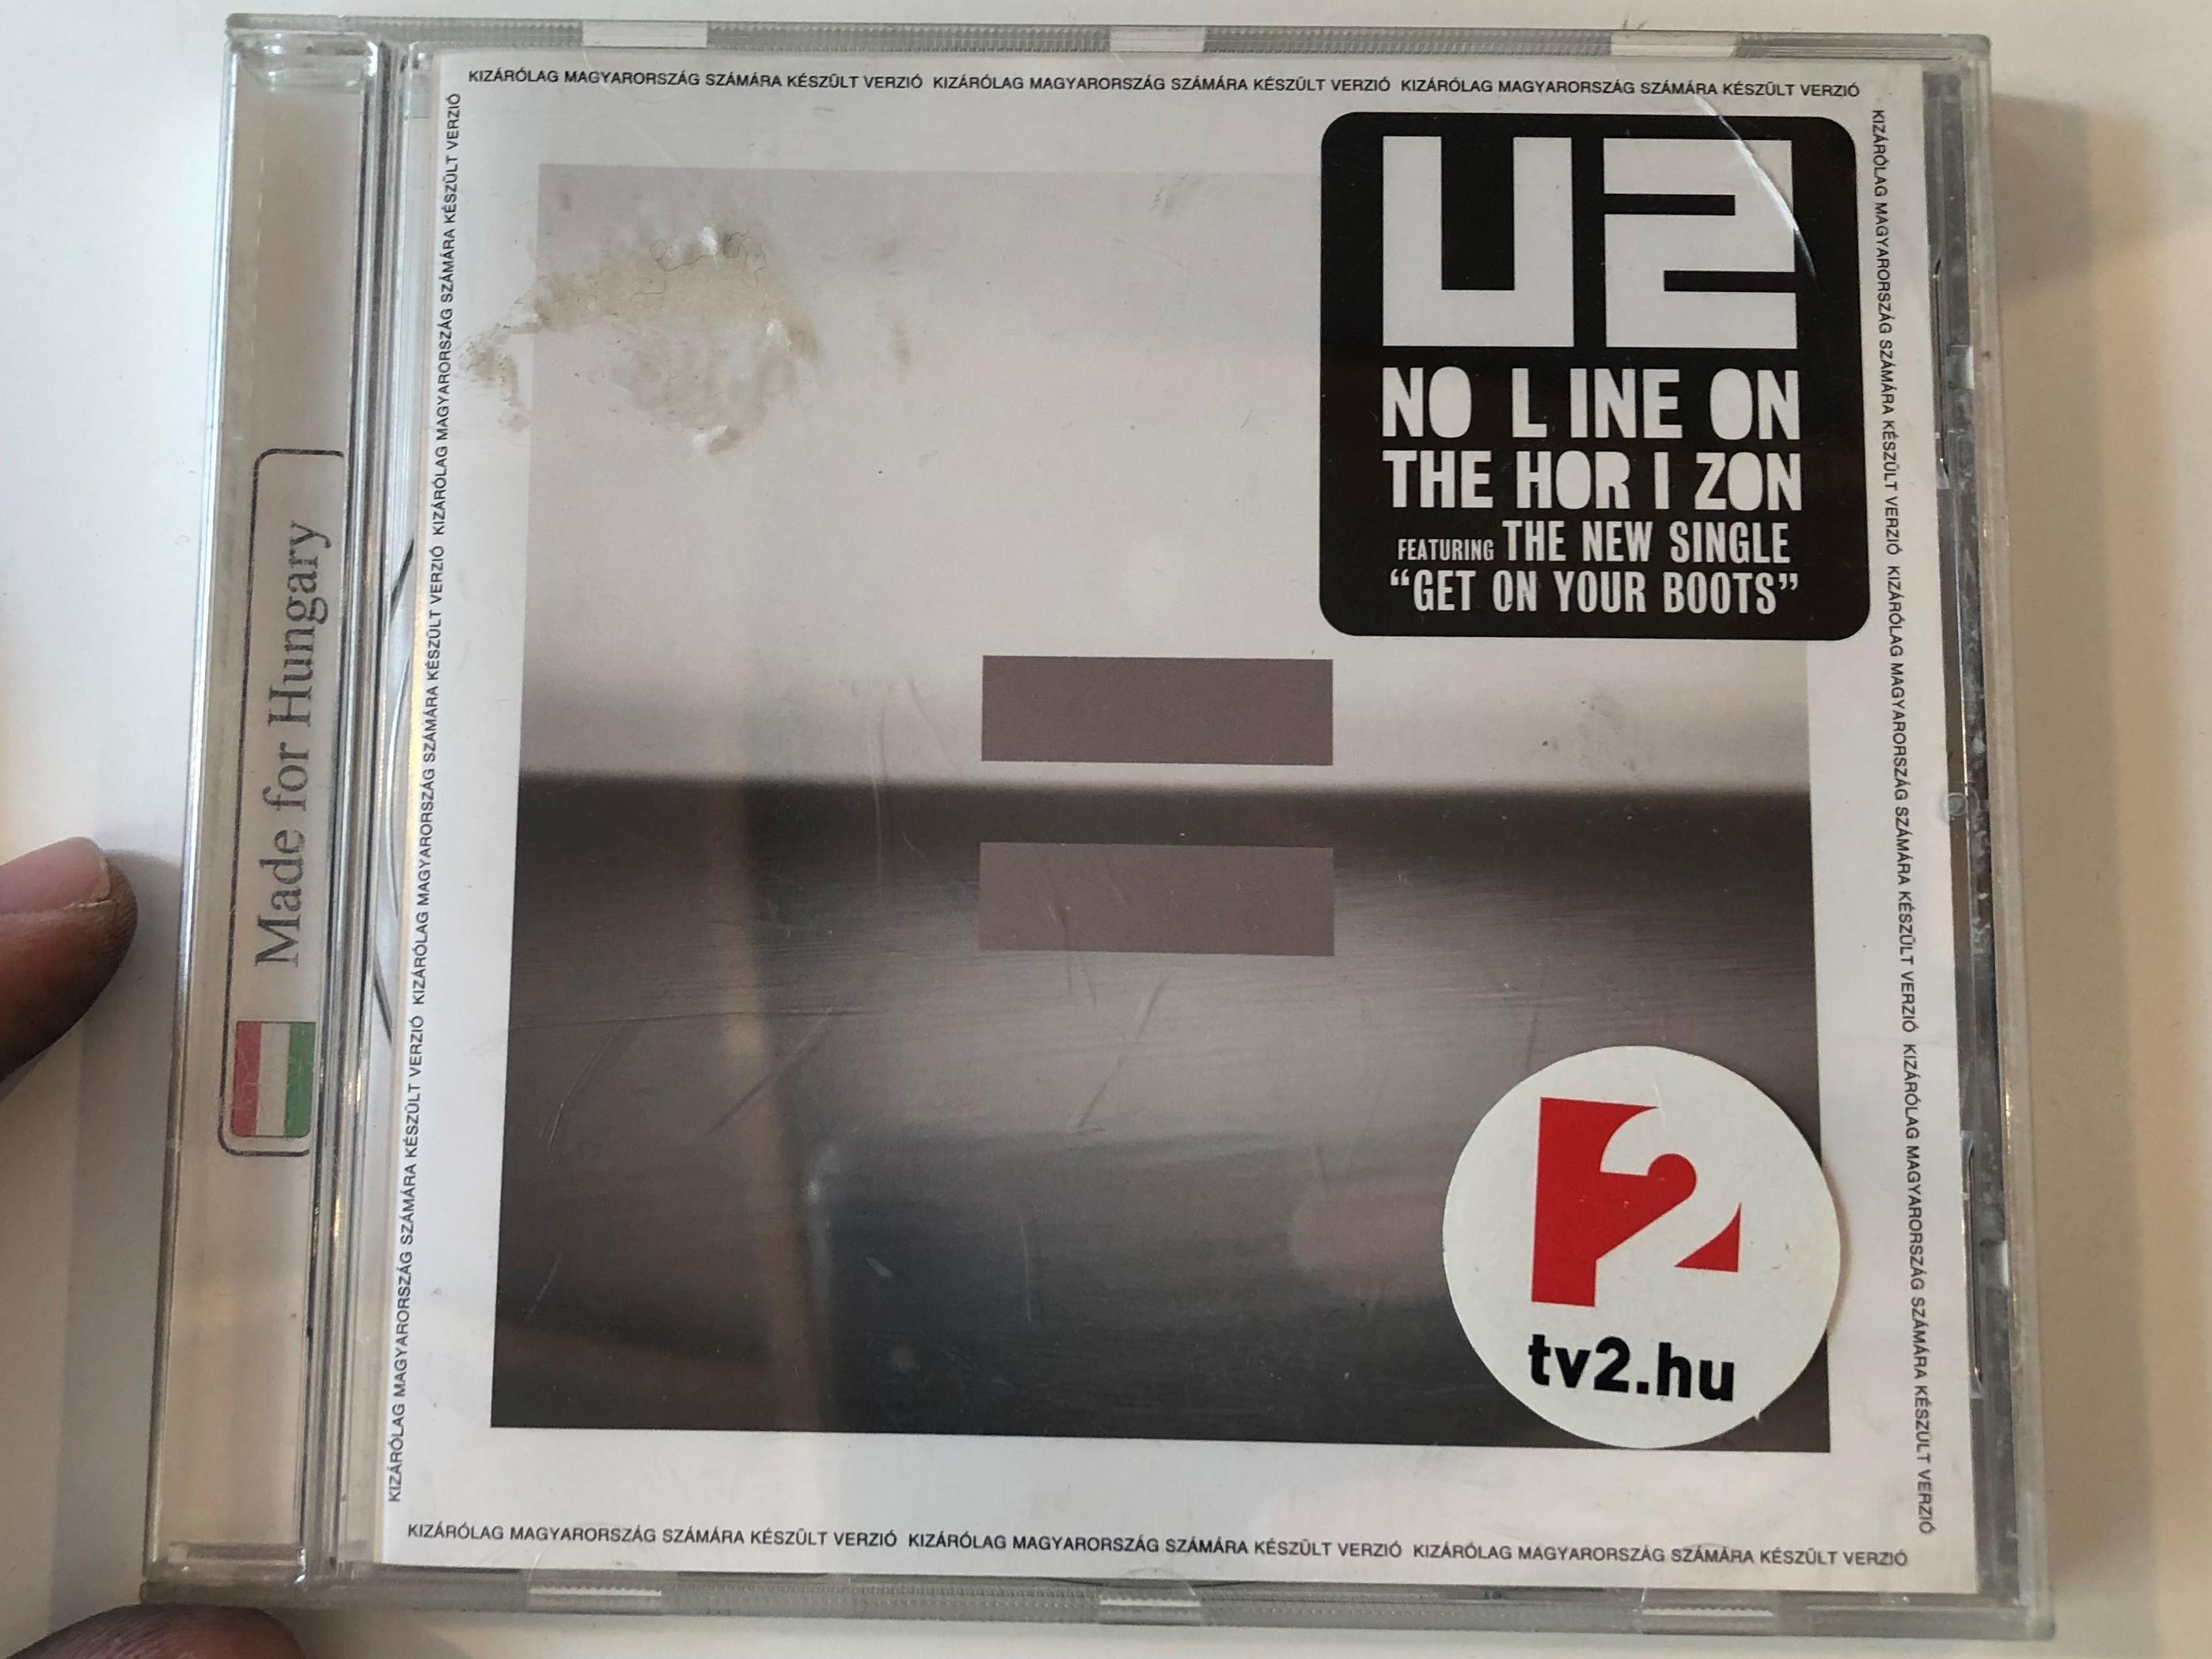 u2-no-line-on-the-horizon-featuring-the-new-single-get-on-your-boots-made-in-hungary-universal-island-records-audio-cd-2009-602517976078-1-.jpg